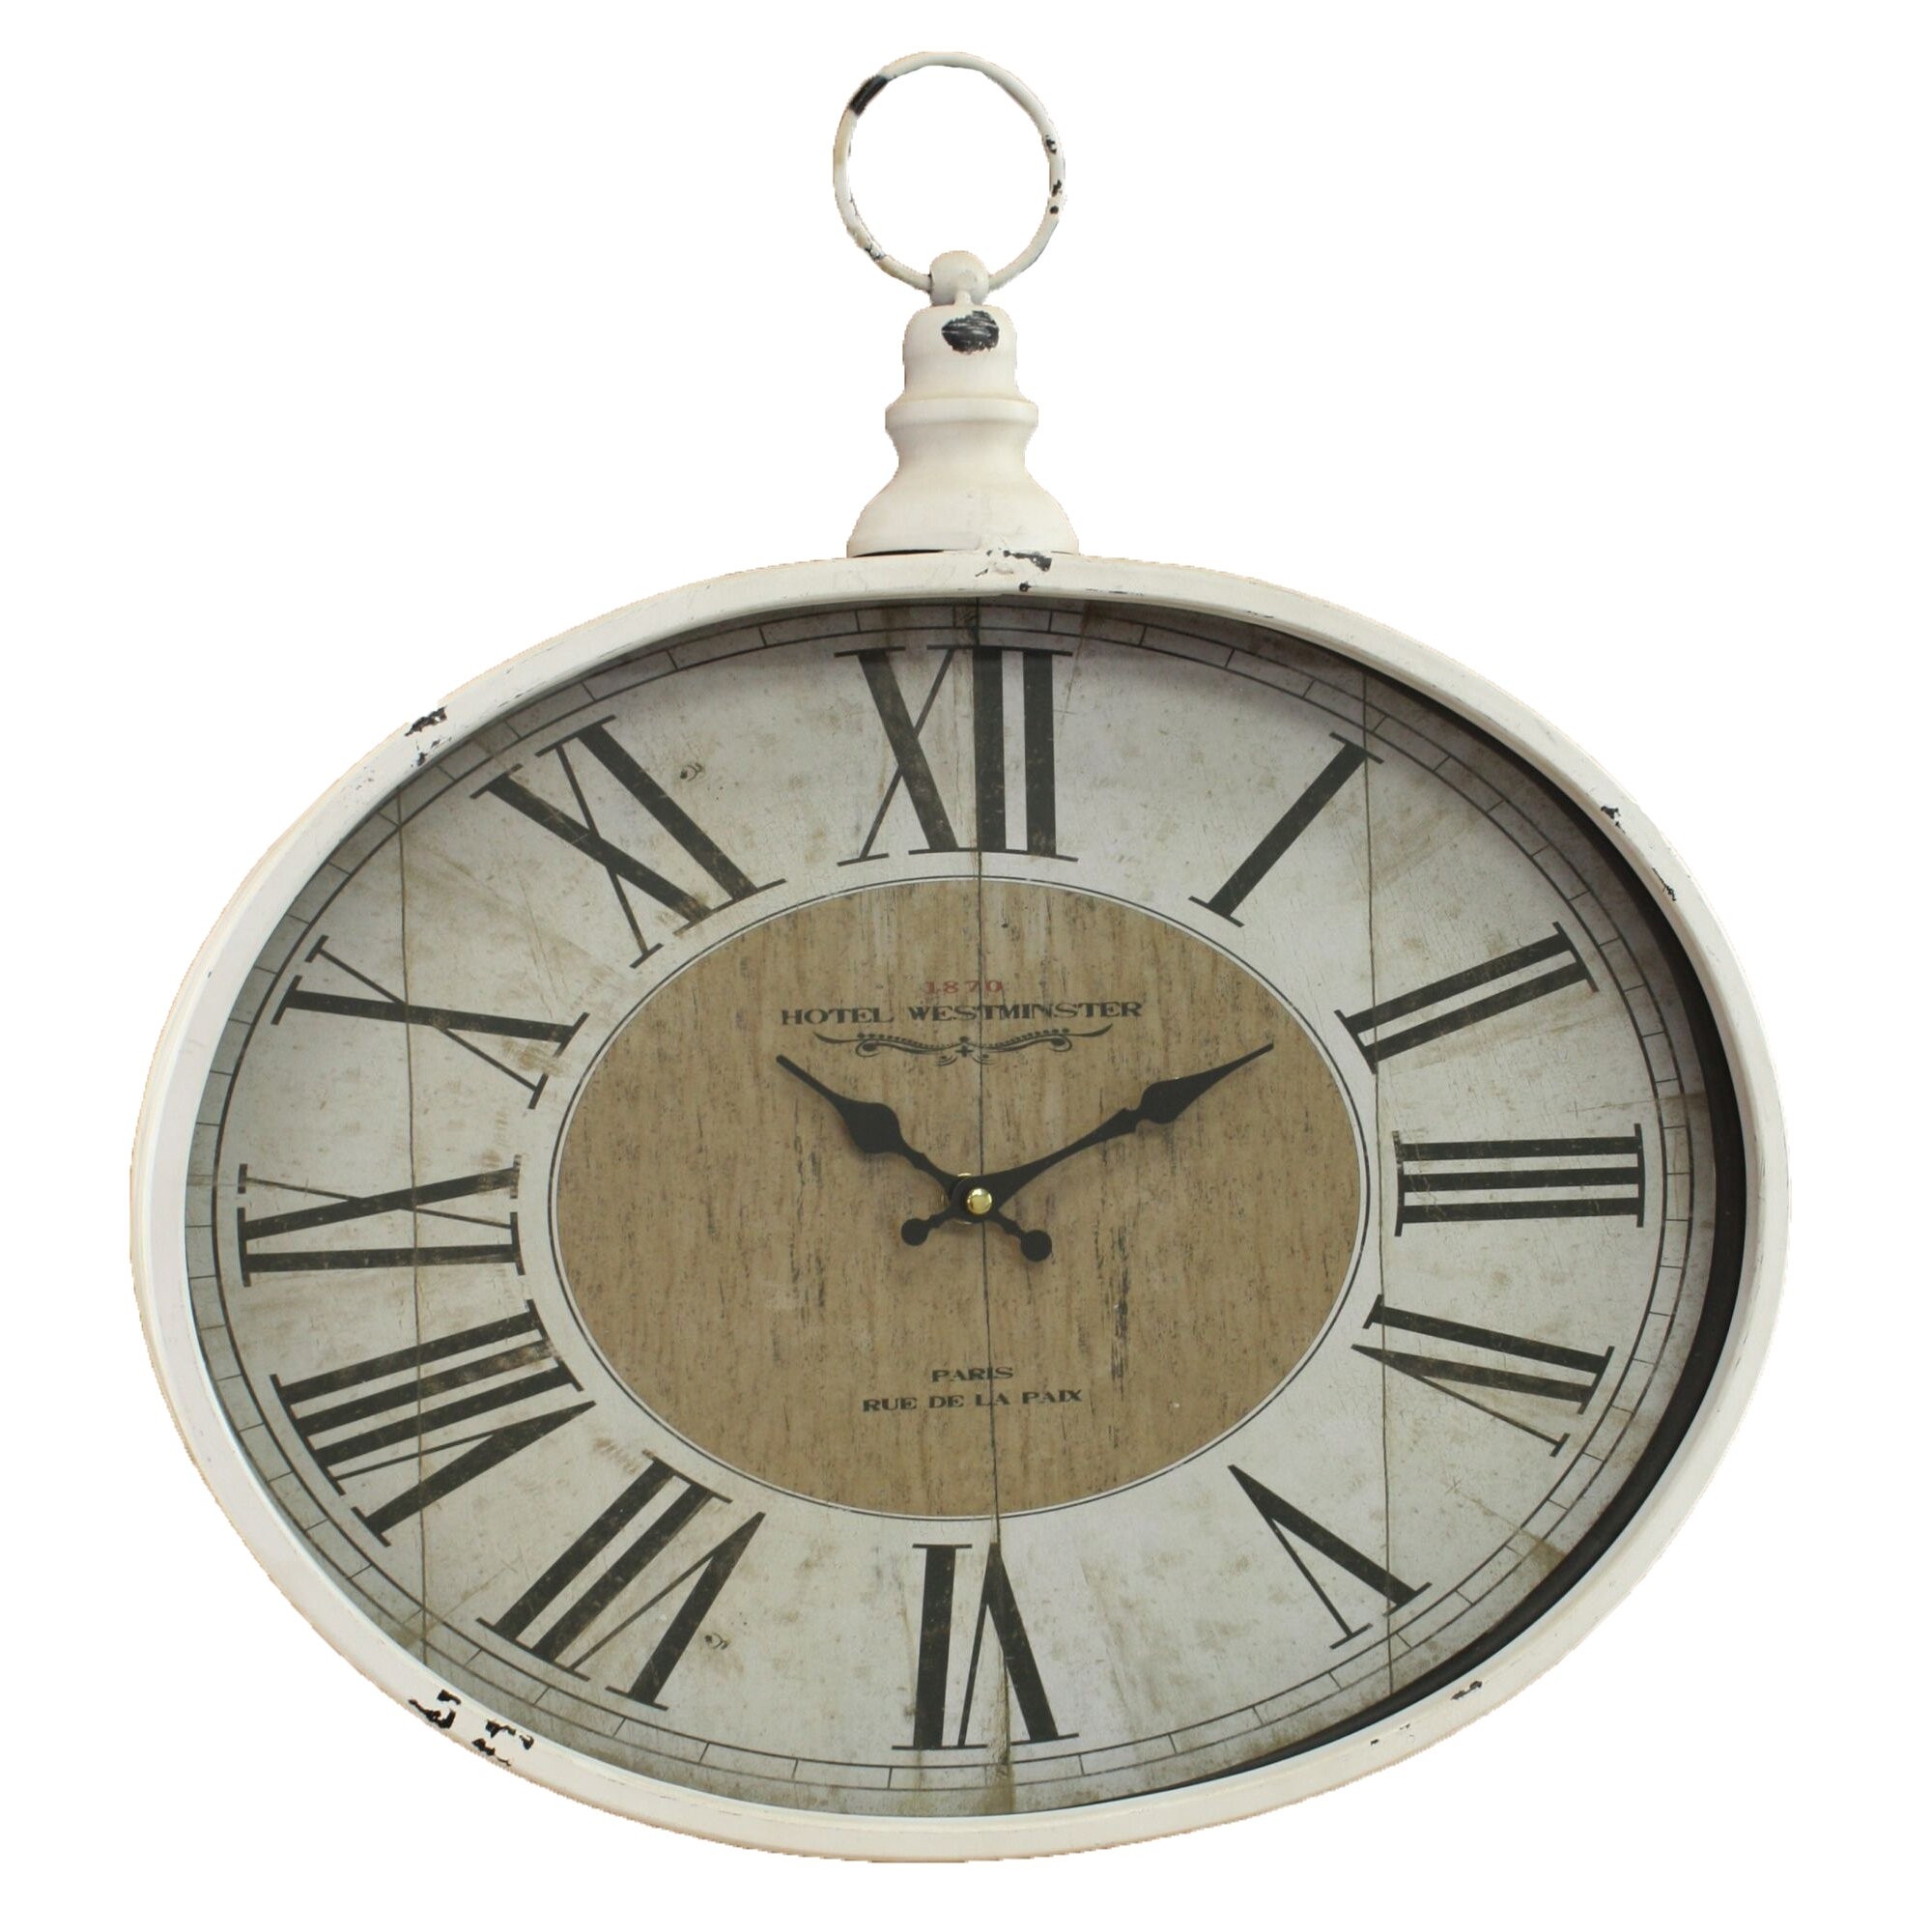 Aspire Home Accents Aspire Home Accents Westminster Pocket Watch Wall Clock, White, Metal